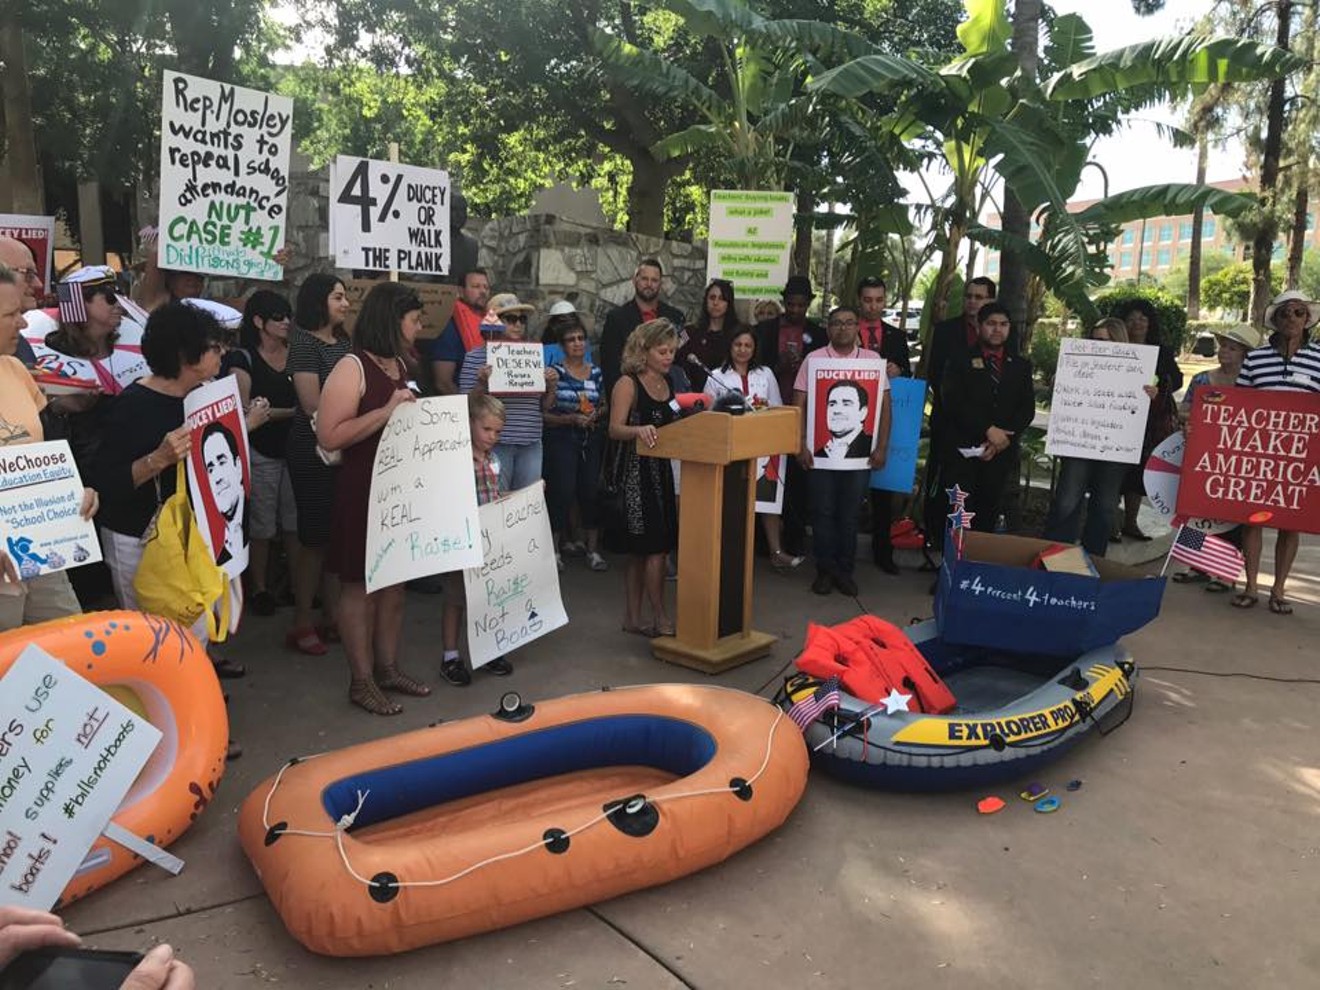 Teachers protested Rep. John Allen's remarks by bringing a flotilla of boats to the state Capitol.